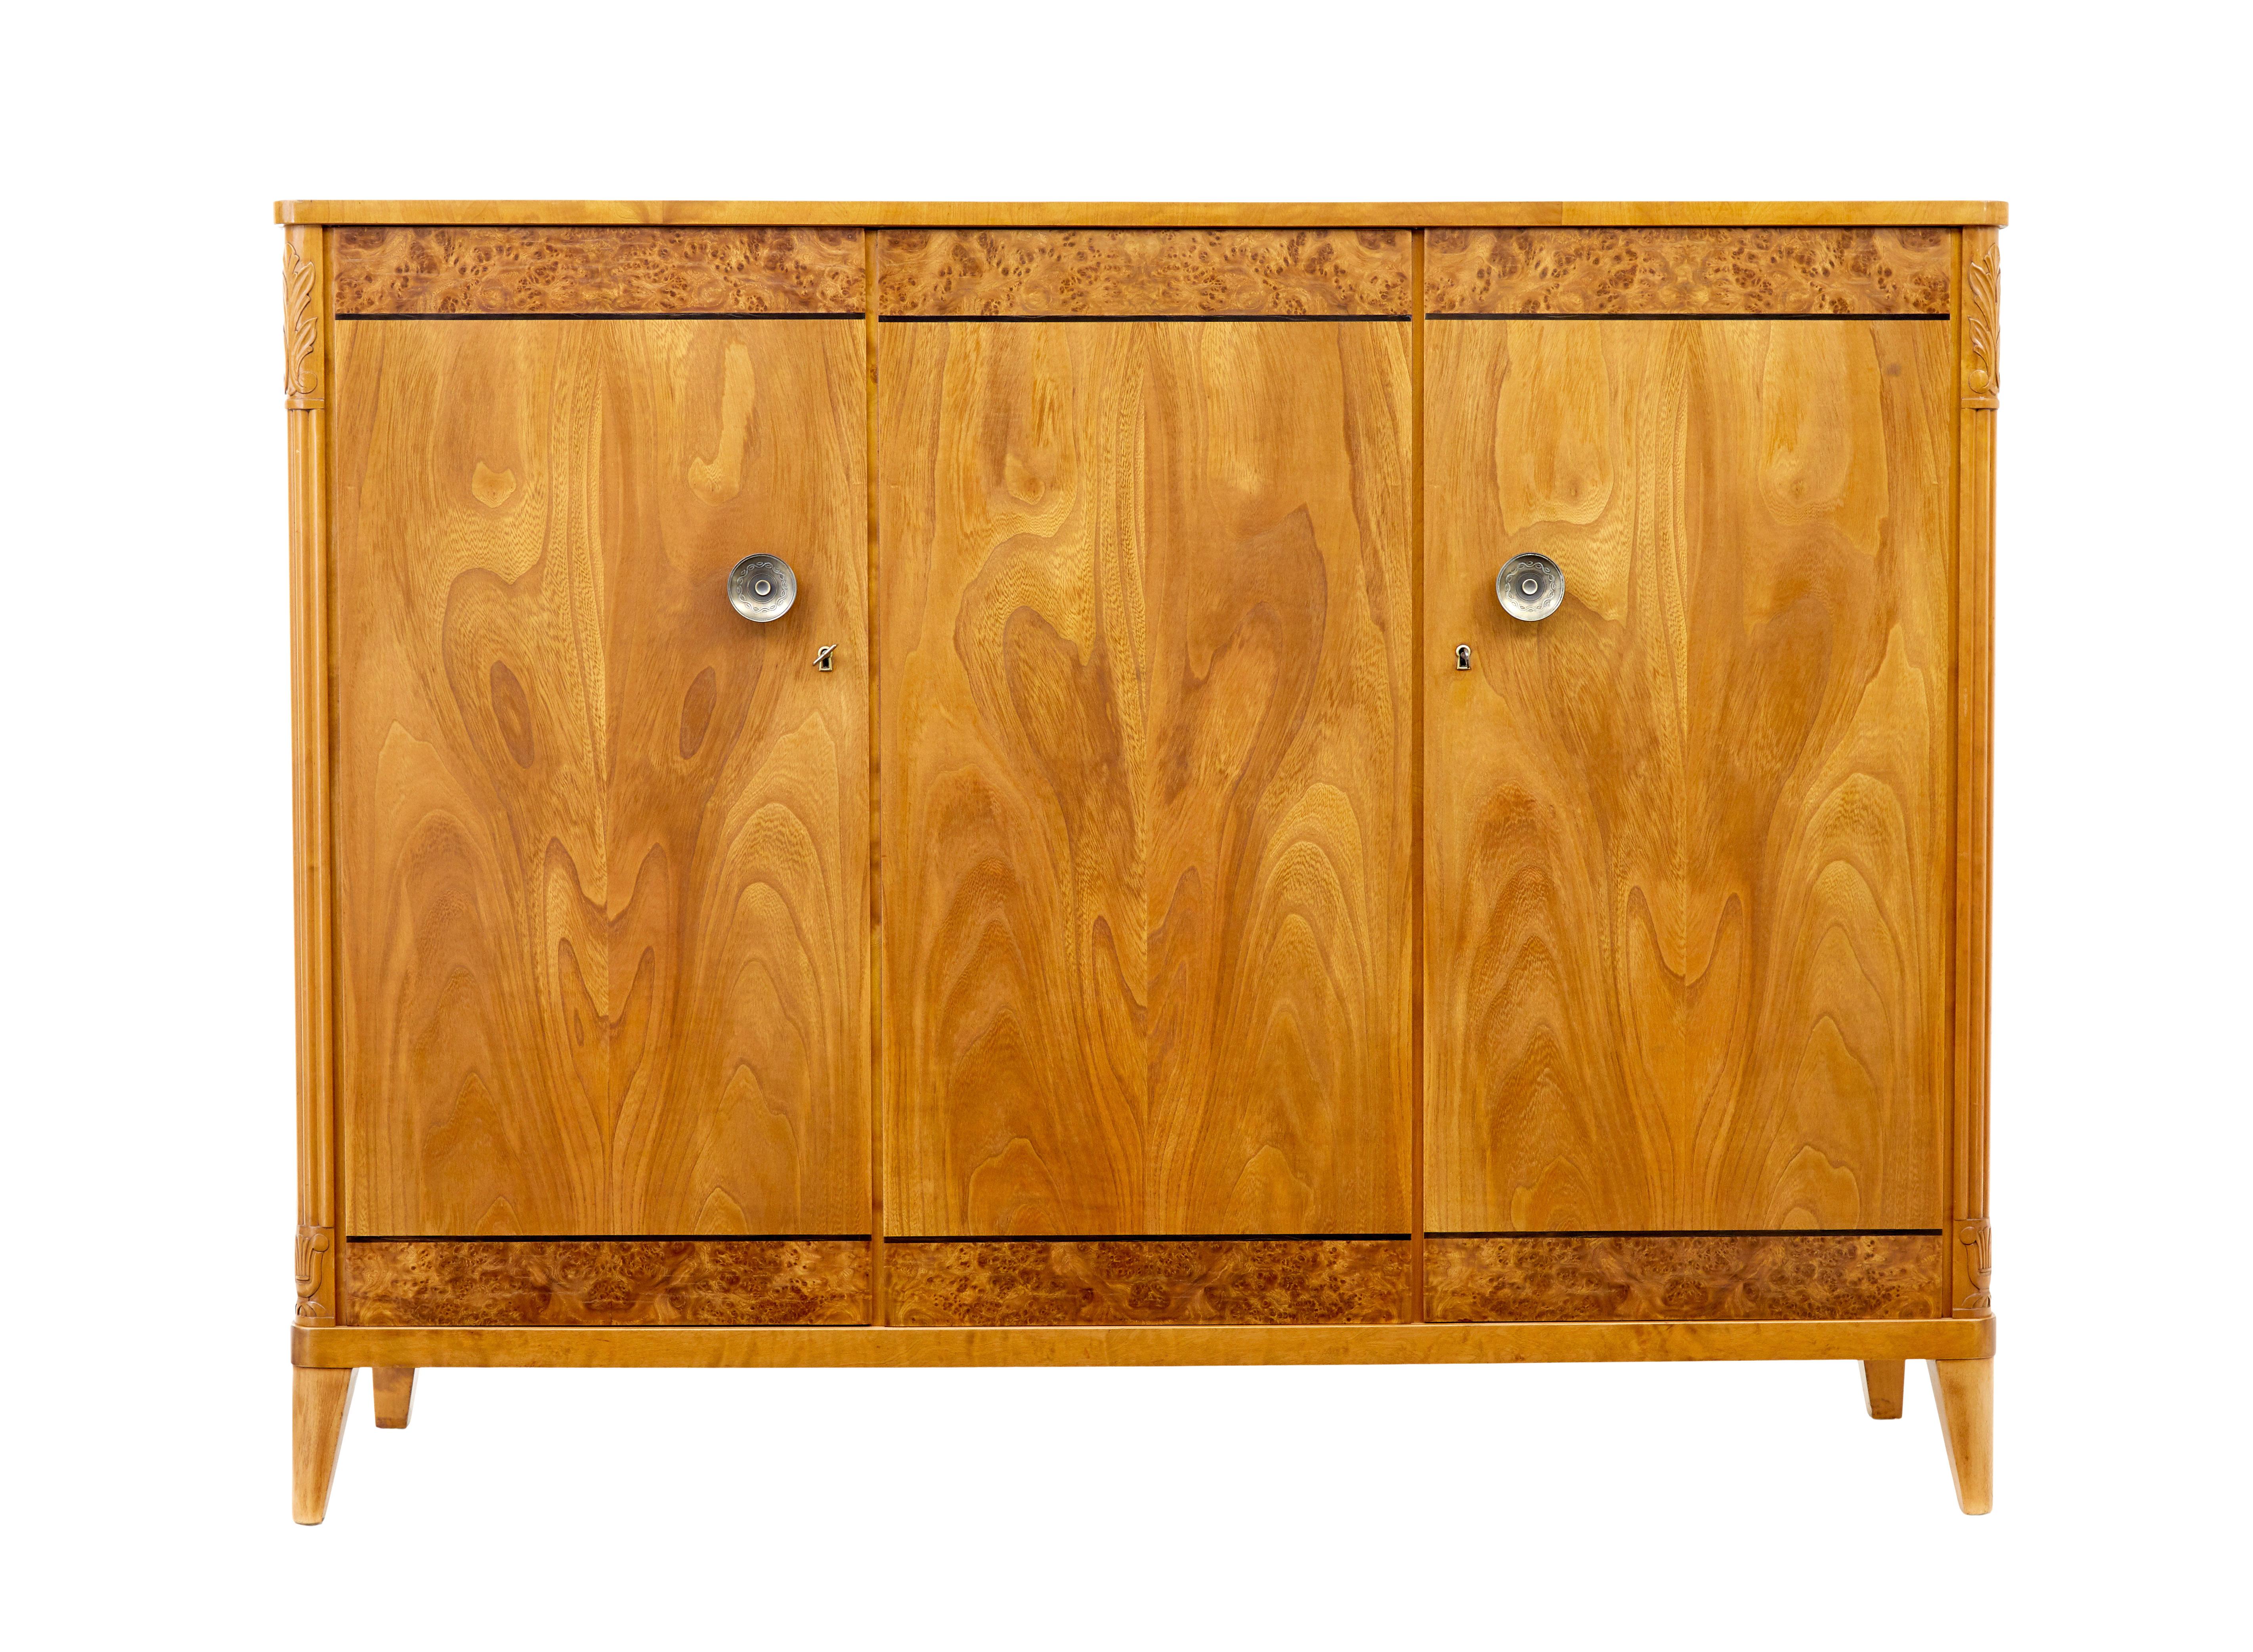 Swedish mid century modern elm and birch sideboard circa 1950.

Classic styling on this elegant sideboard, using elm, birch and burr veneers. Front 3 doors veneered in matched elm, burr decoration to top and bottom with stringing, each with ornate